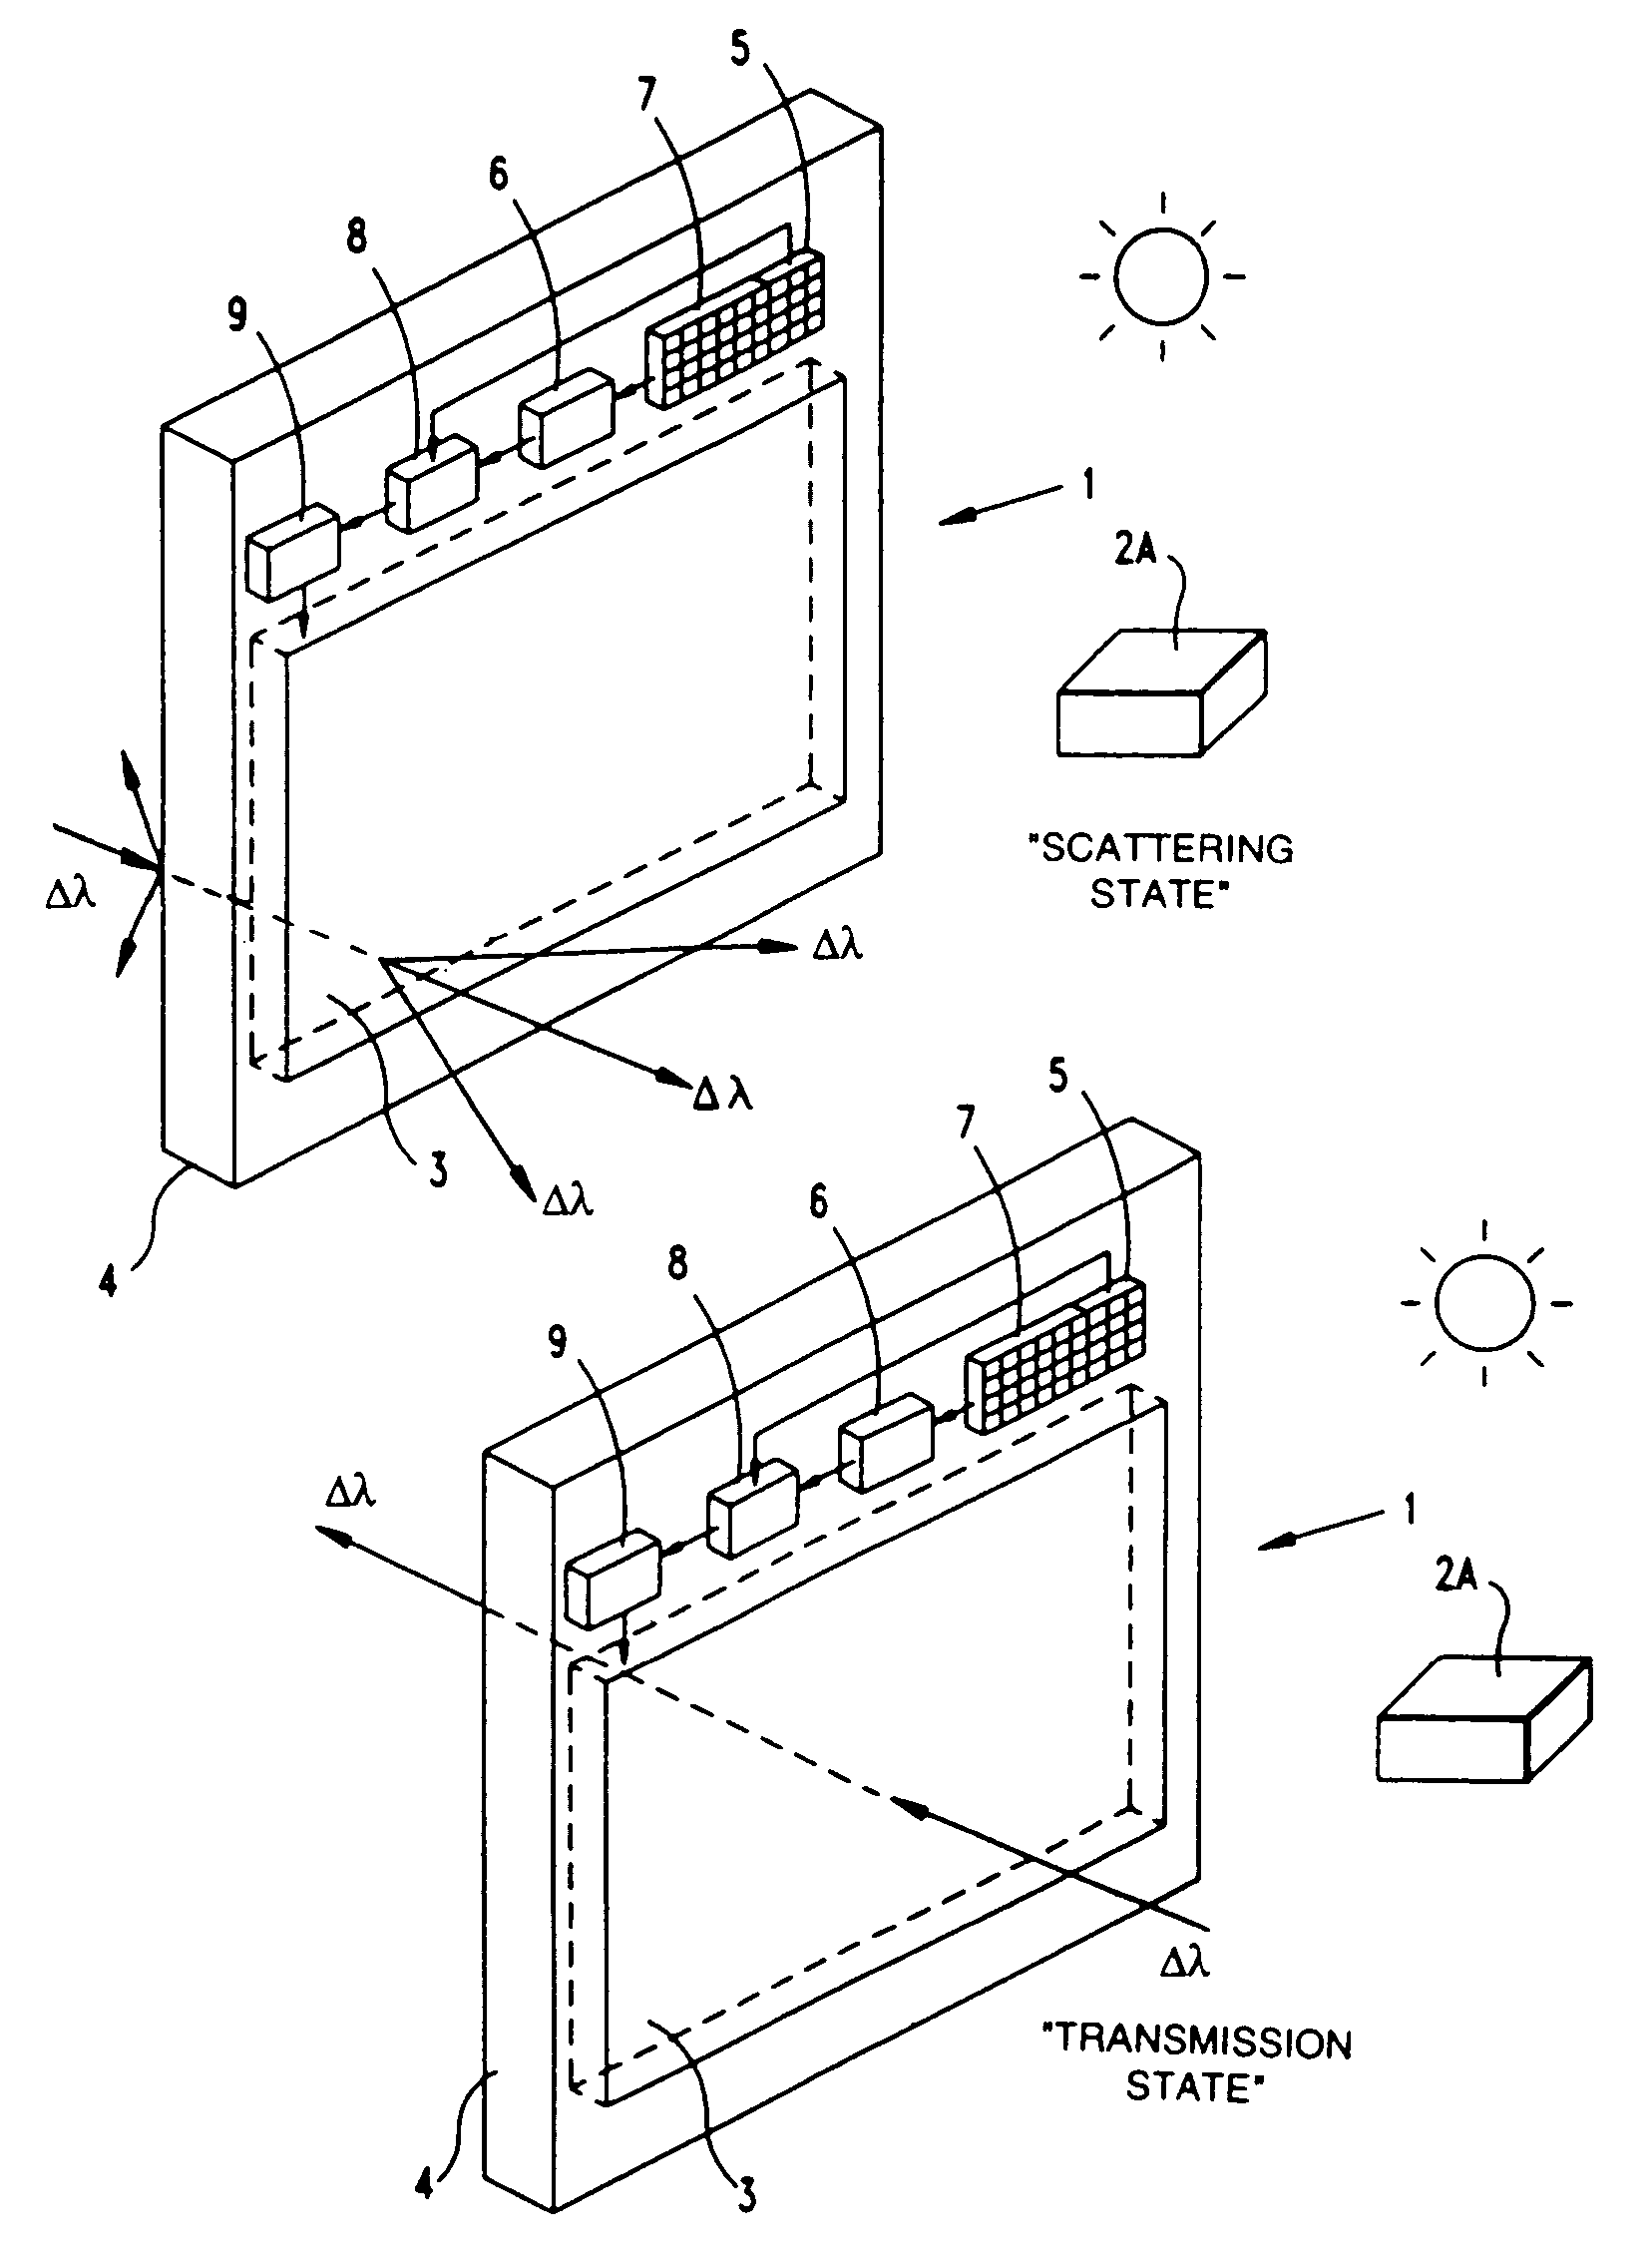 Electro-optical glazing structures having scattering and transparent modes of operation and methods and apparatus for making the same